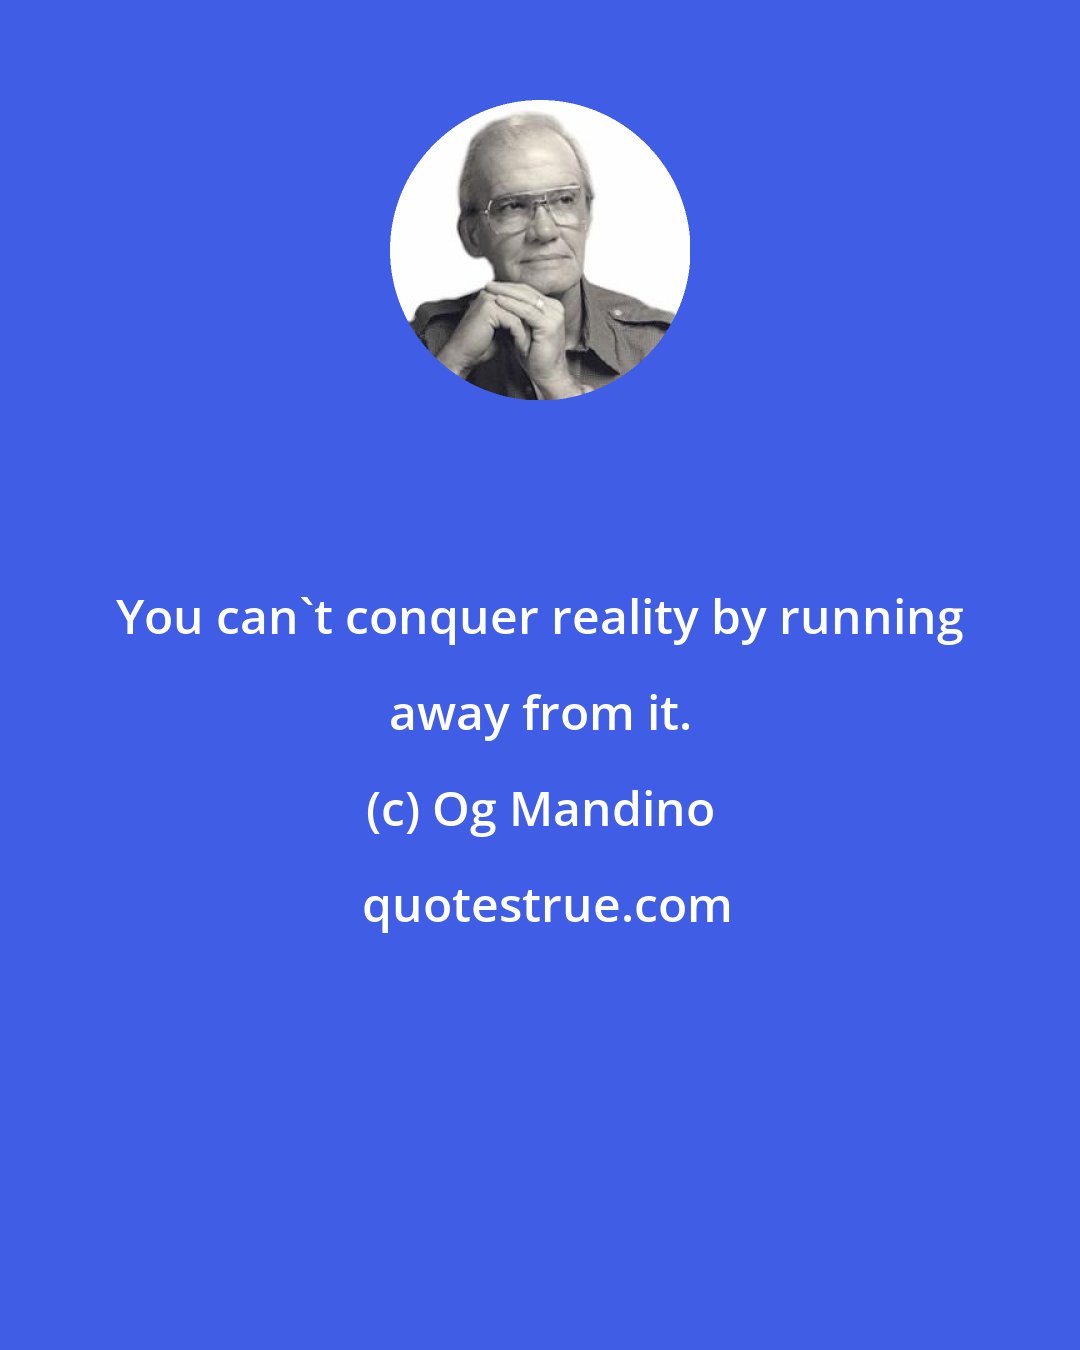 Og Mandino: You can't conquer reality by running away from it.